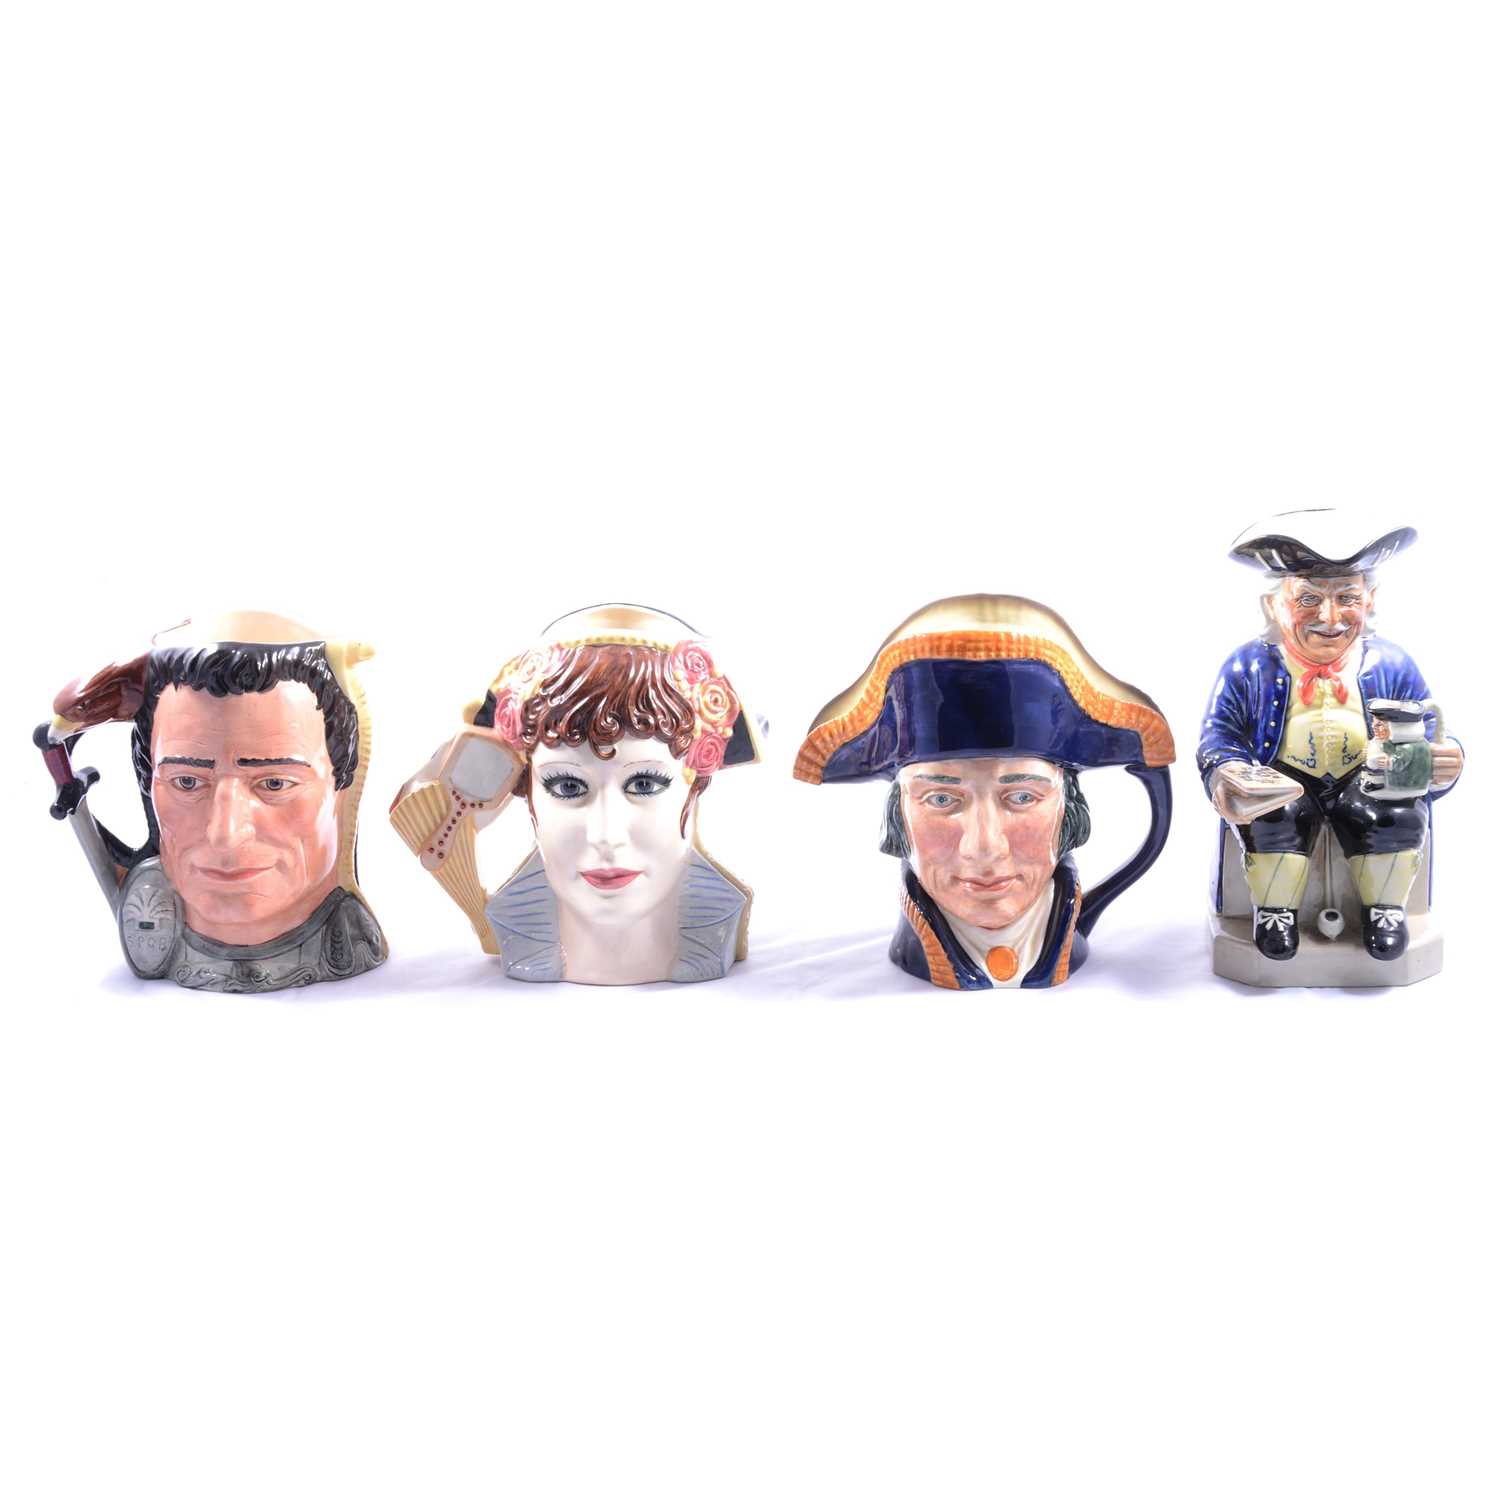 Eight toby / character jugs, Royal Doulton, Kevin Francis, Wood & Sons, mostly ltd ed. - Image 2 of 2